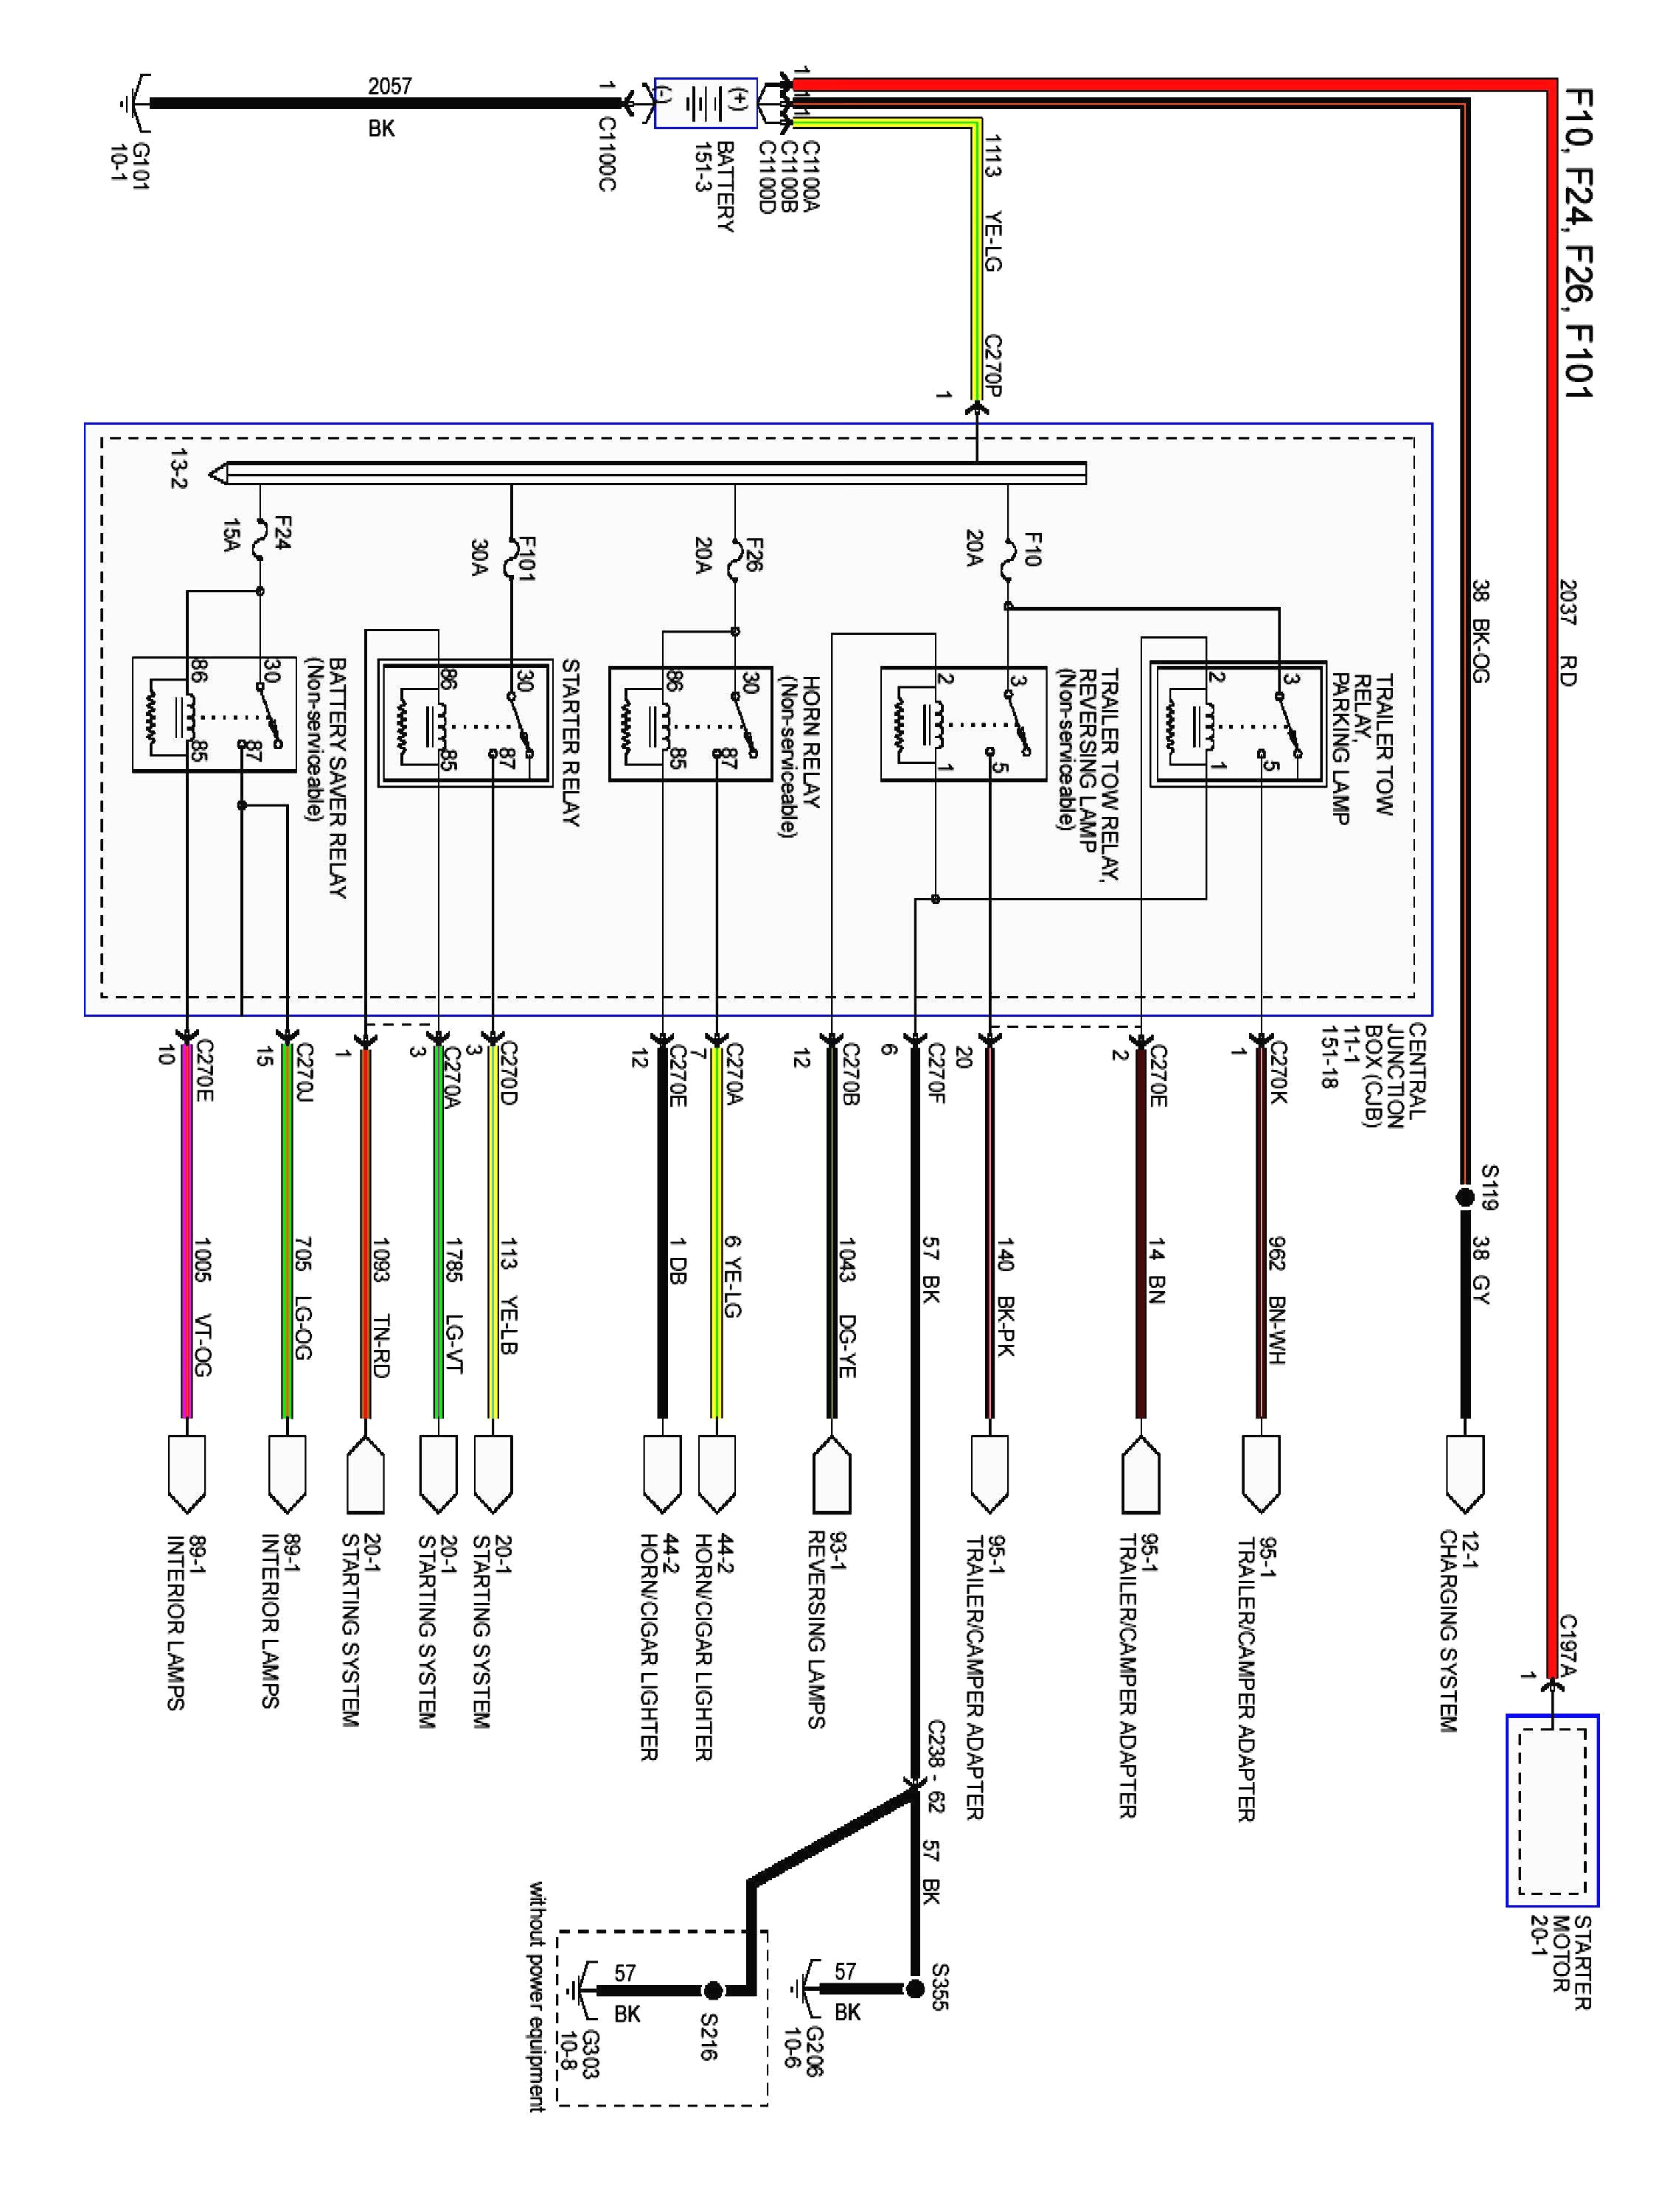 zx2 wiring diagram wiring diagrams posts 1999 ford zx2 wiring diagram wiring diagram blog 2003 ford